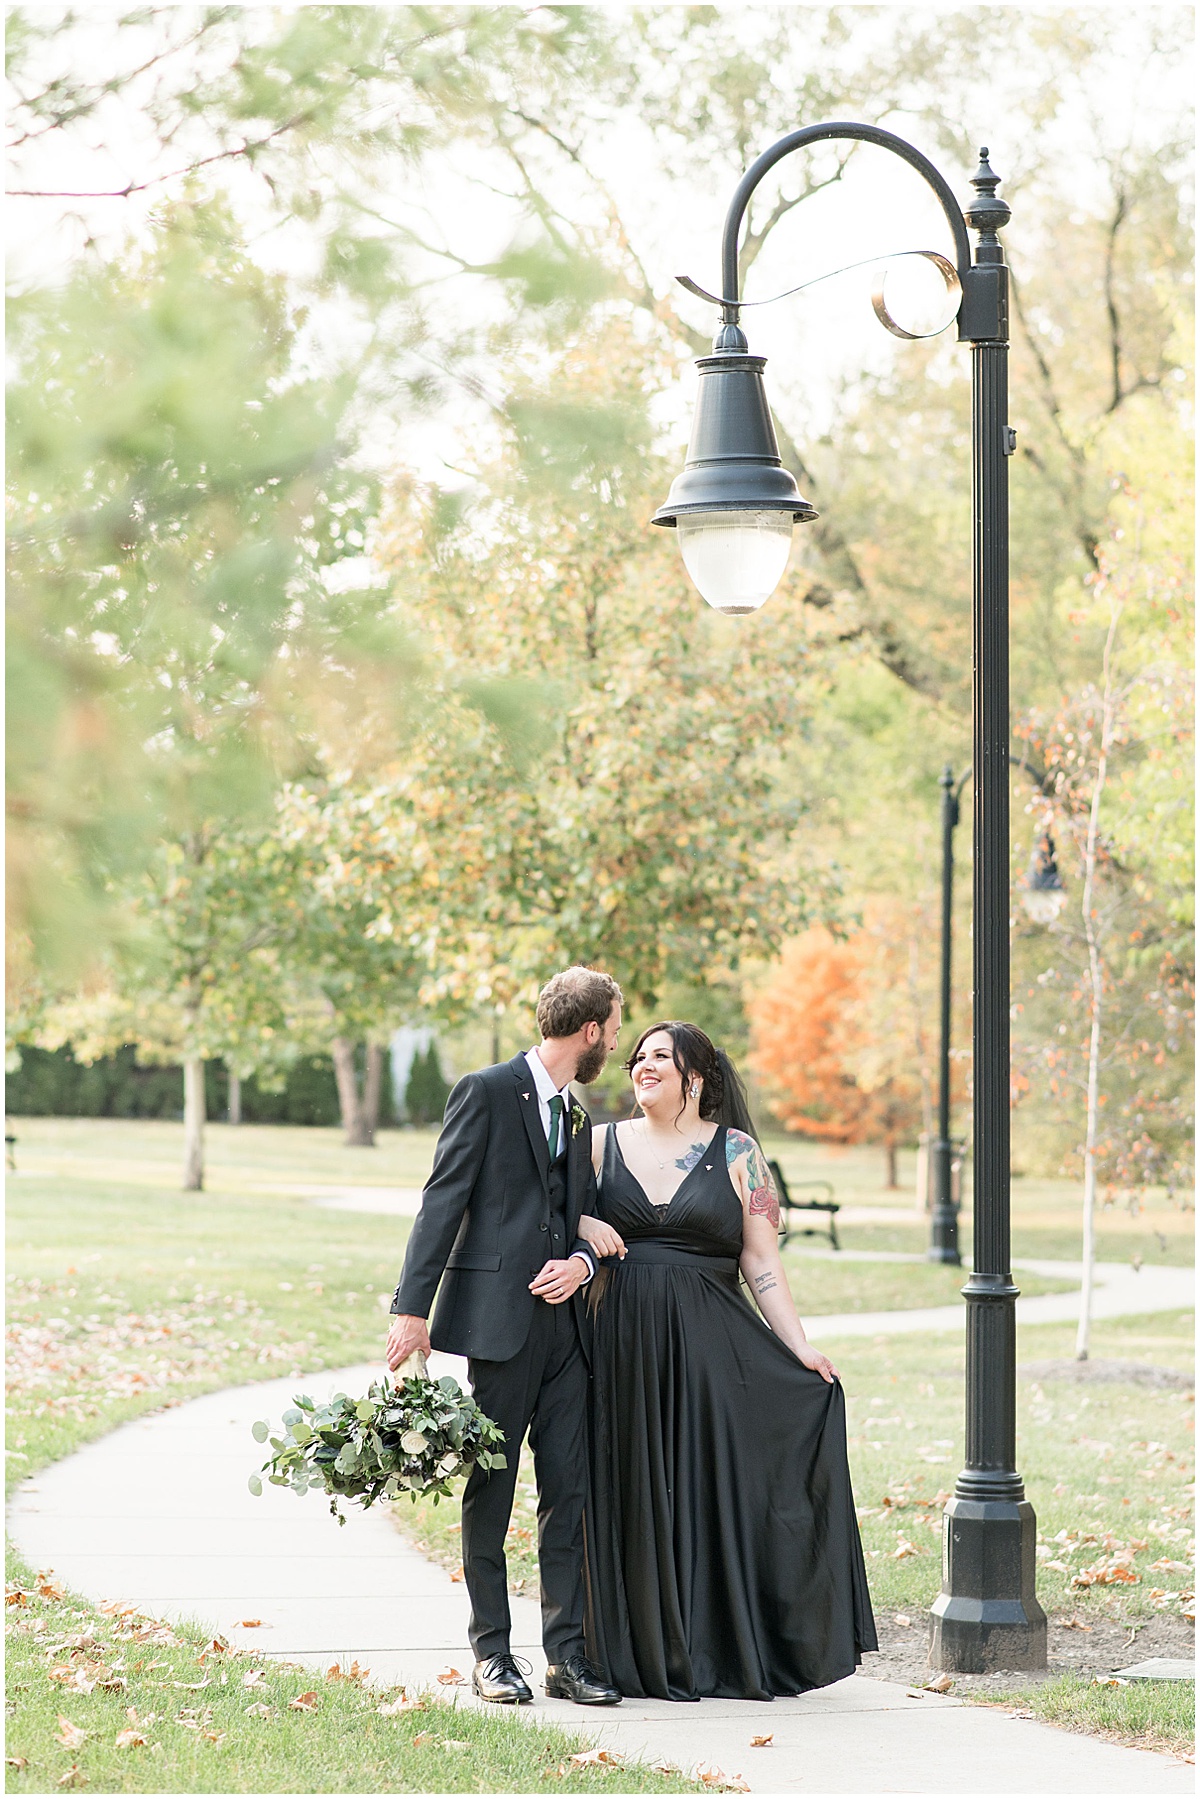 Just married photos after eMbers Venue wedding in Rensselaer, Indiana with a bride wearing black by Victoria Rayburn Photography